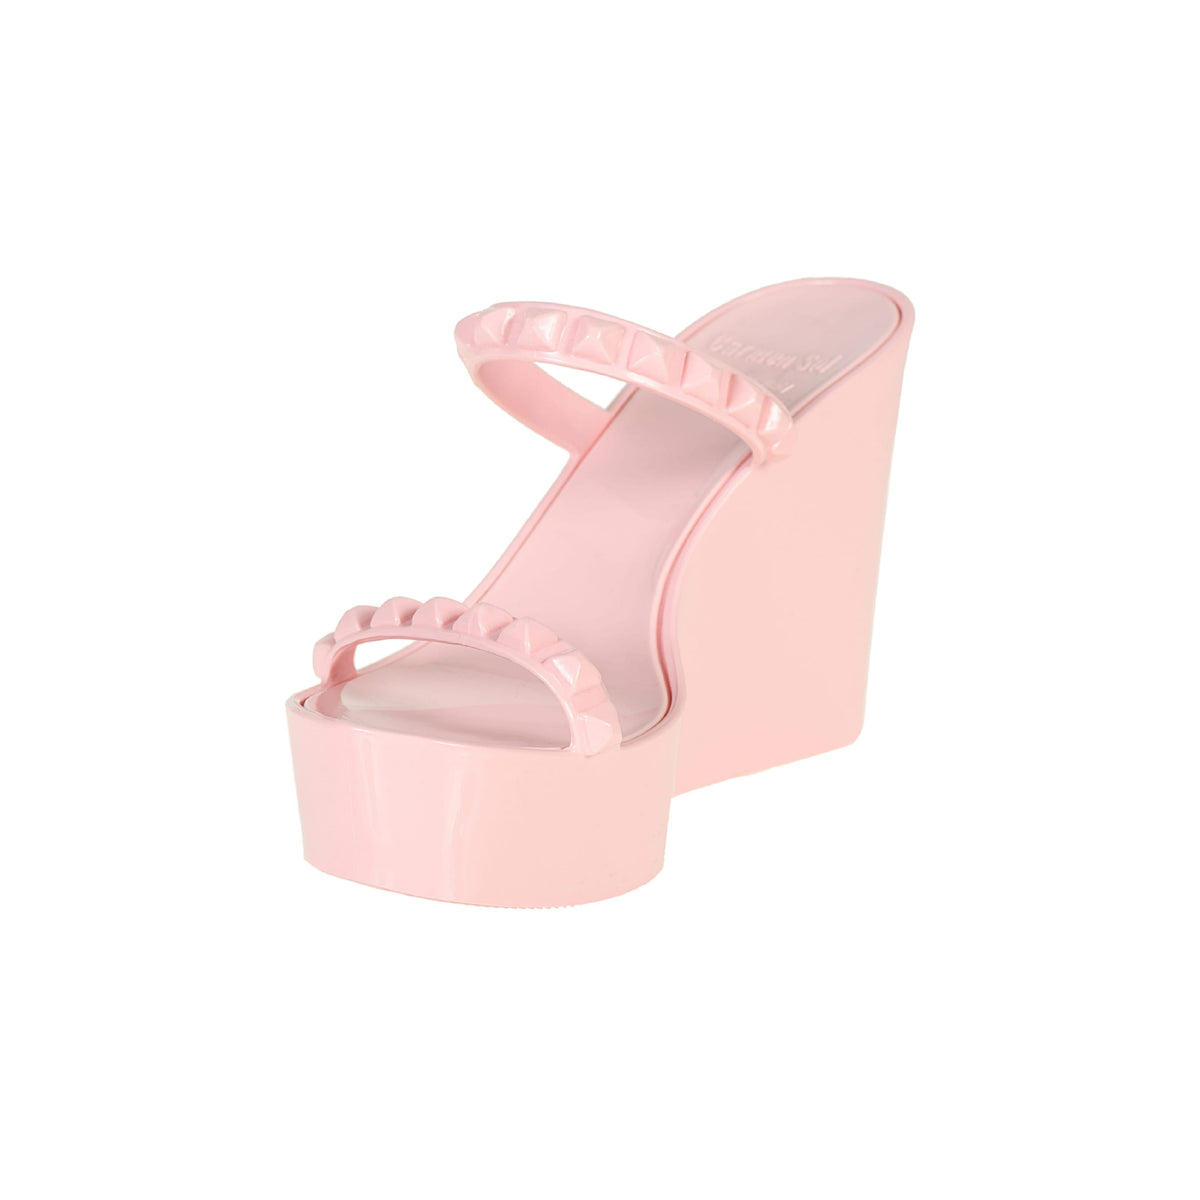 Baby pink jelly shoes 80s from Carmen Sol perfect for the pool party